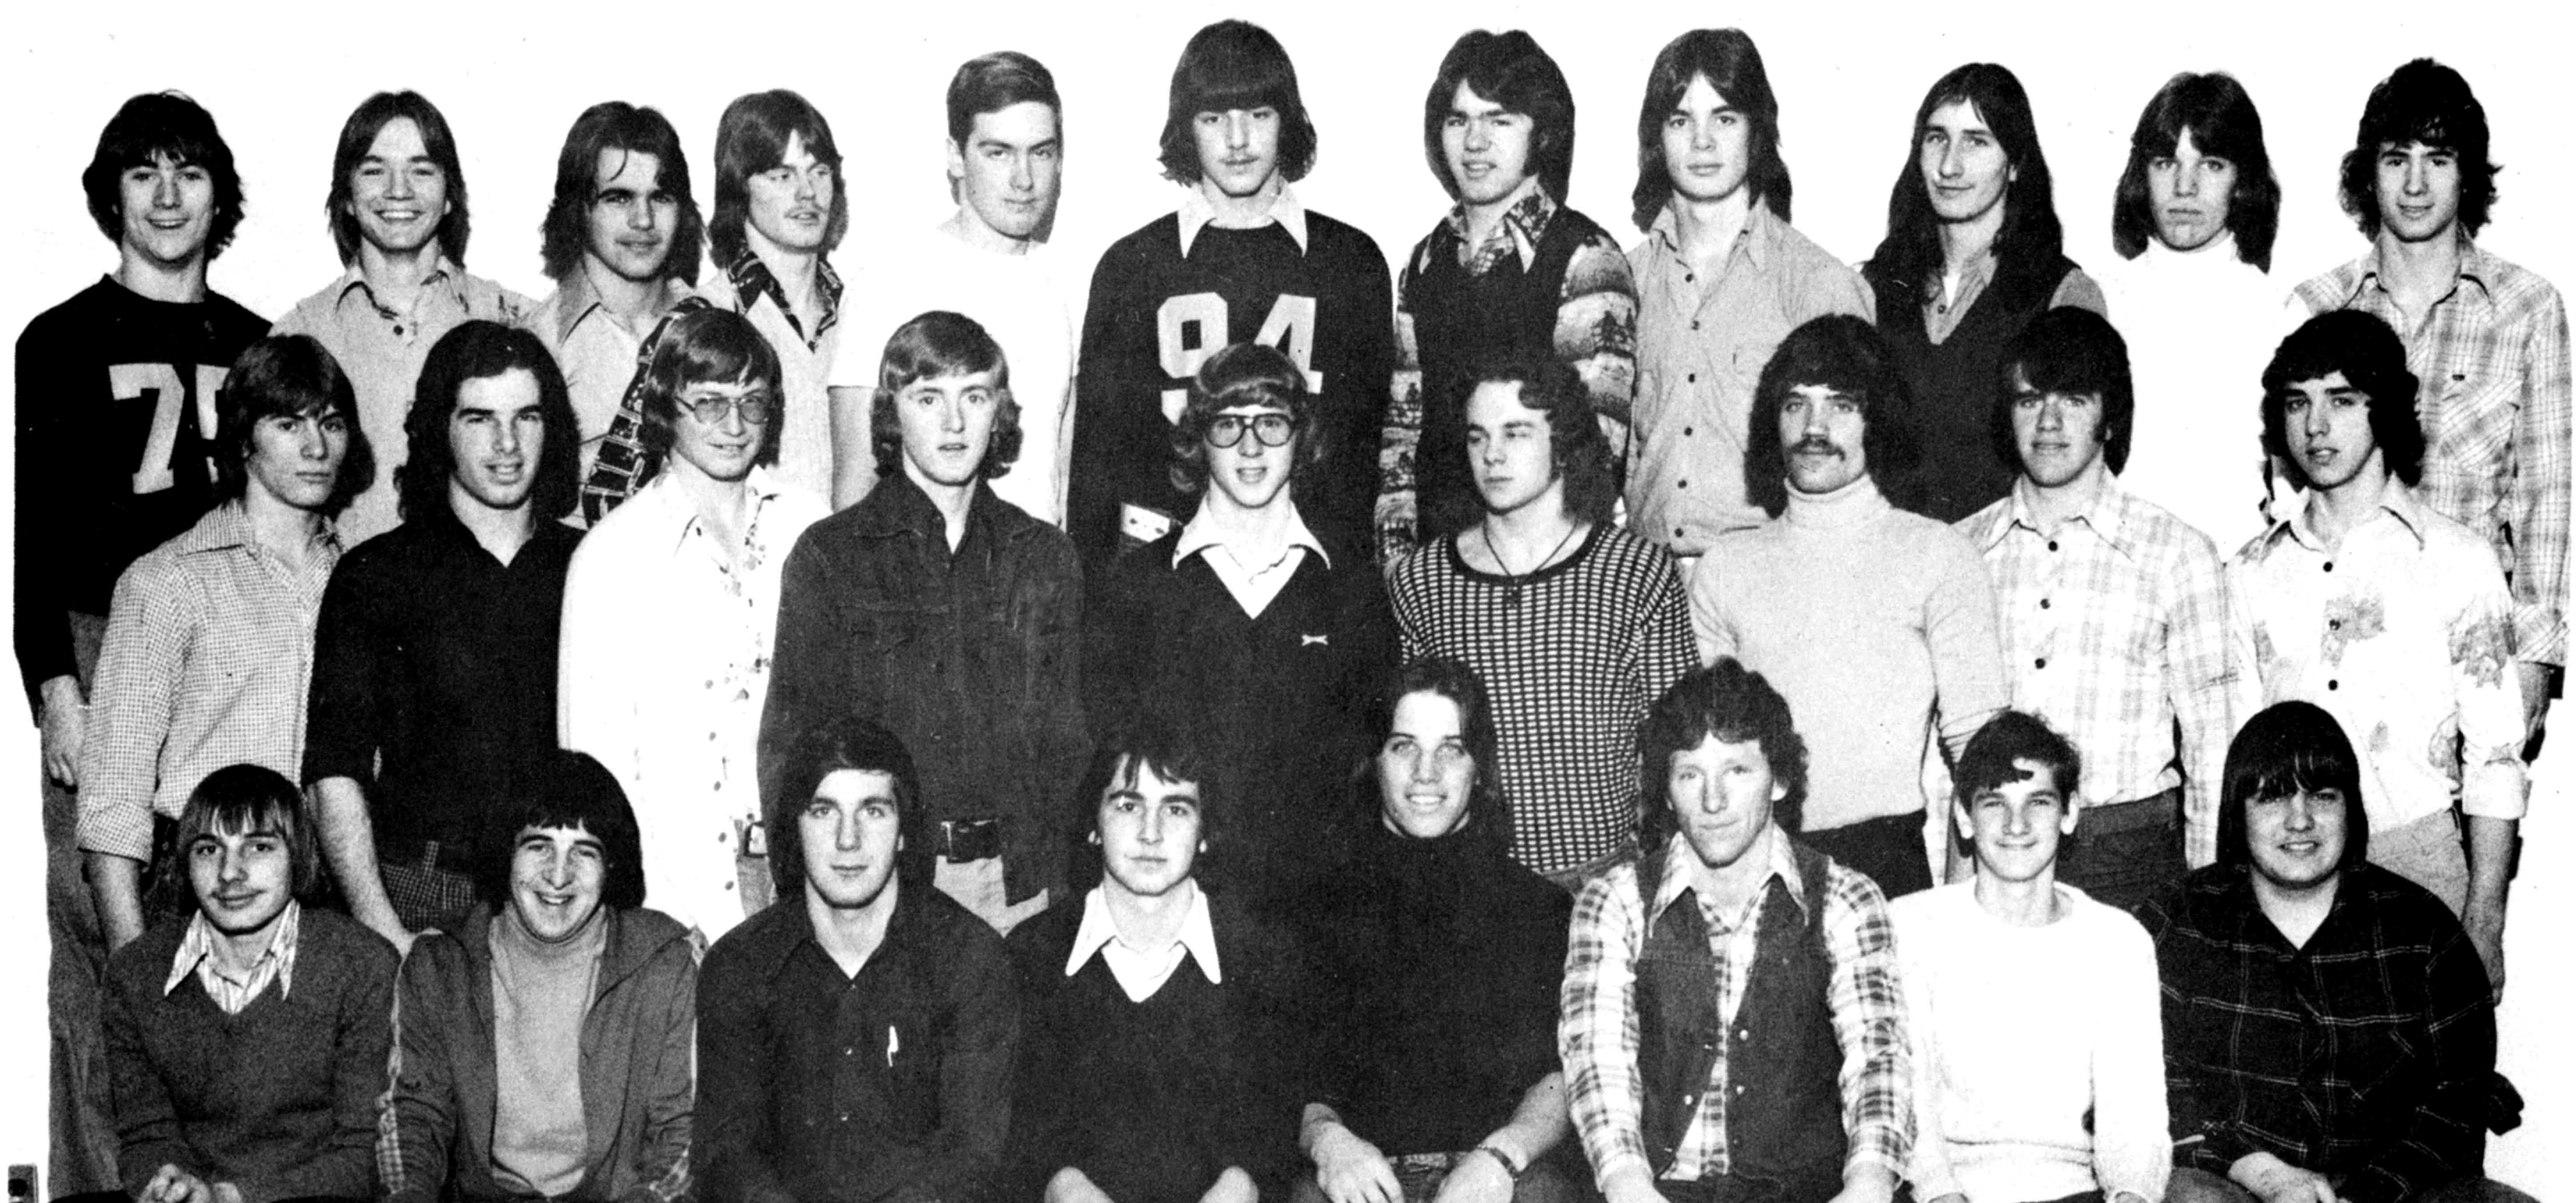 (Click to magnify) NO captions (alas!) However, we have Darryl Horne (bottom left), Eldon Wagg (2nd from right, bottom row), Craig Morrison (2nd left, top row). Other names - but no location in photo given: Bill Newton, Steve Shortt, Greg Rutherford, Tony